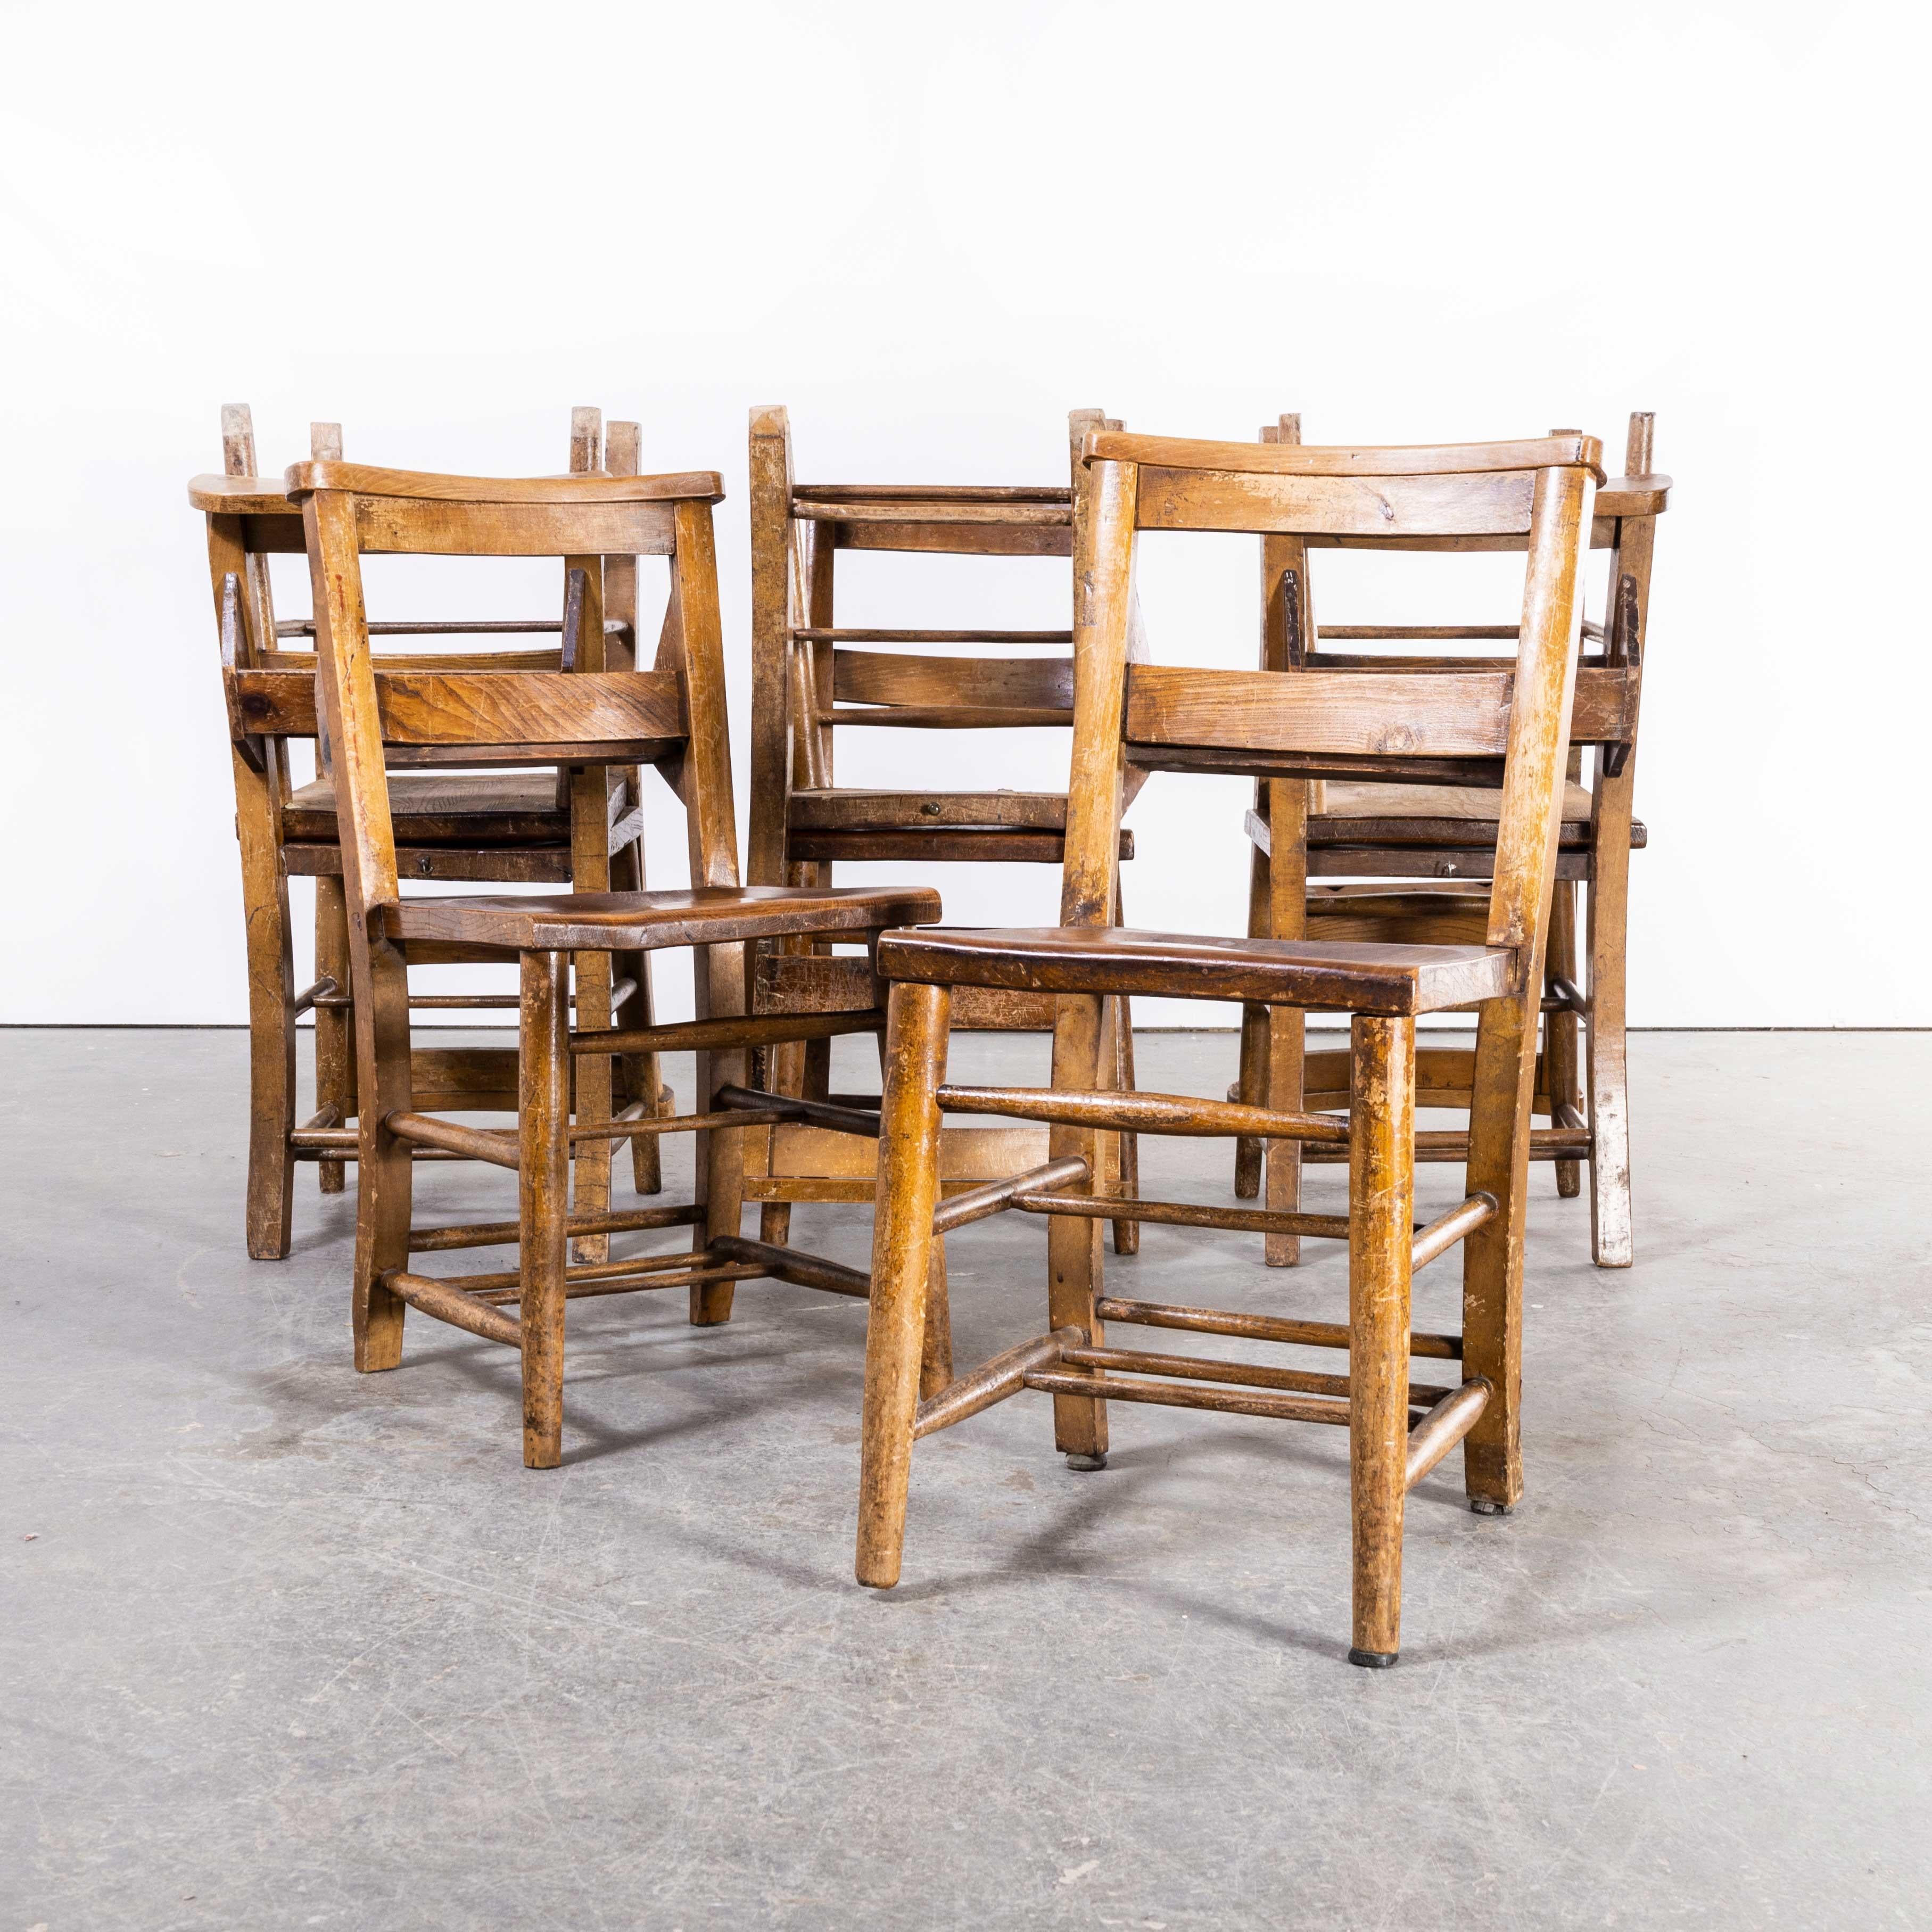 1940’s Ash Church – chapel dining chairs – set of eight
1940’s Ash Church – chapel dining chairs – set of eight. England has a wonderfully rich heritage for making chairs. At the height of production at the turn of the last century over 4500 chairs